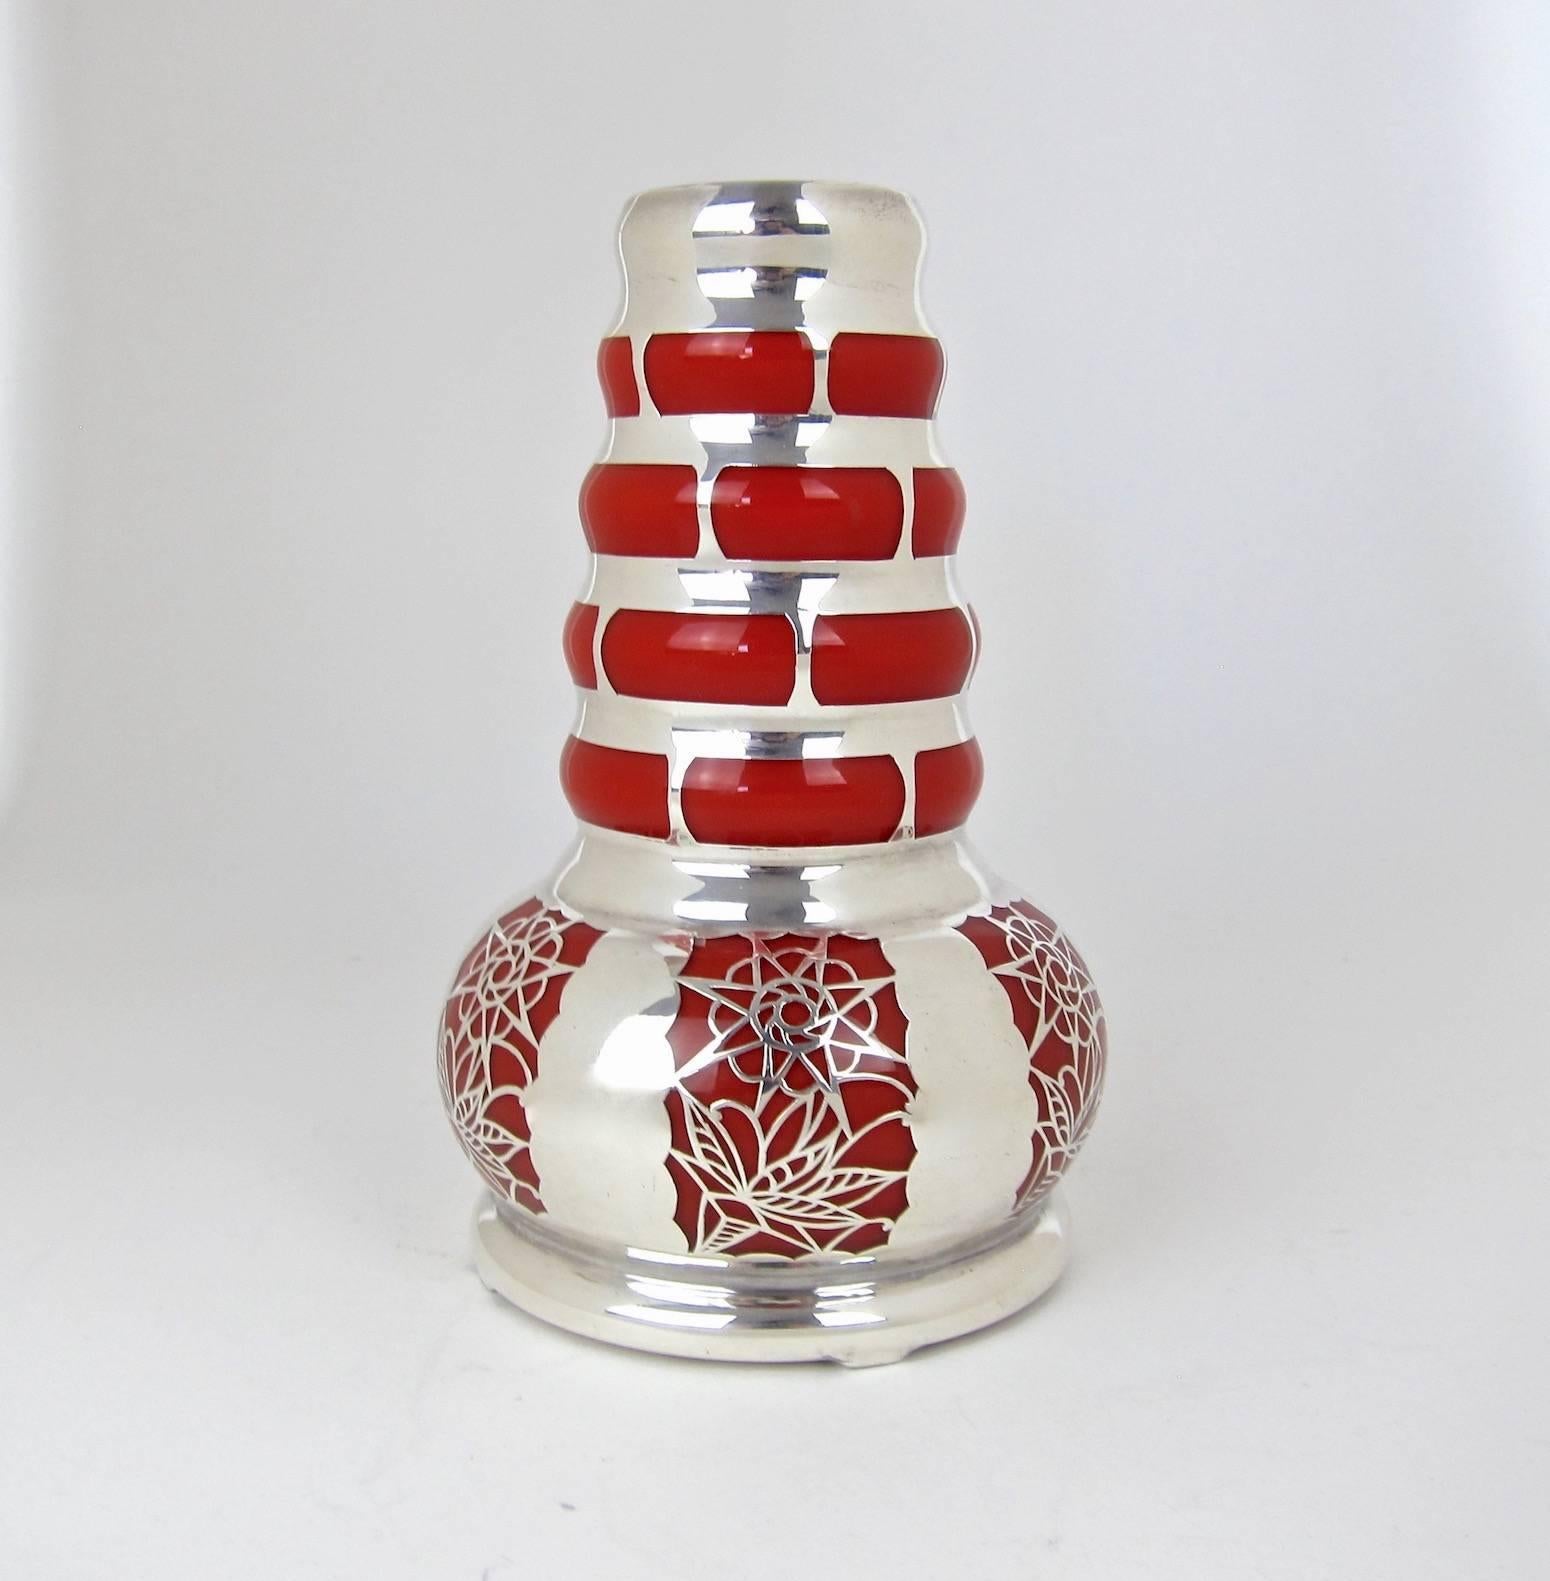 A vintage continental vase of opaque orange glass encased within a sophisticated pure silver overlay.

The vintage glass vessel is likely of Czech / Bohemian origin with the ornamental silver overlay designed and completed during the 1950s in